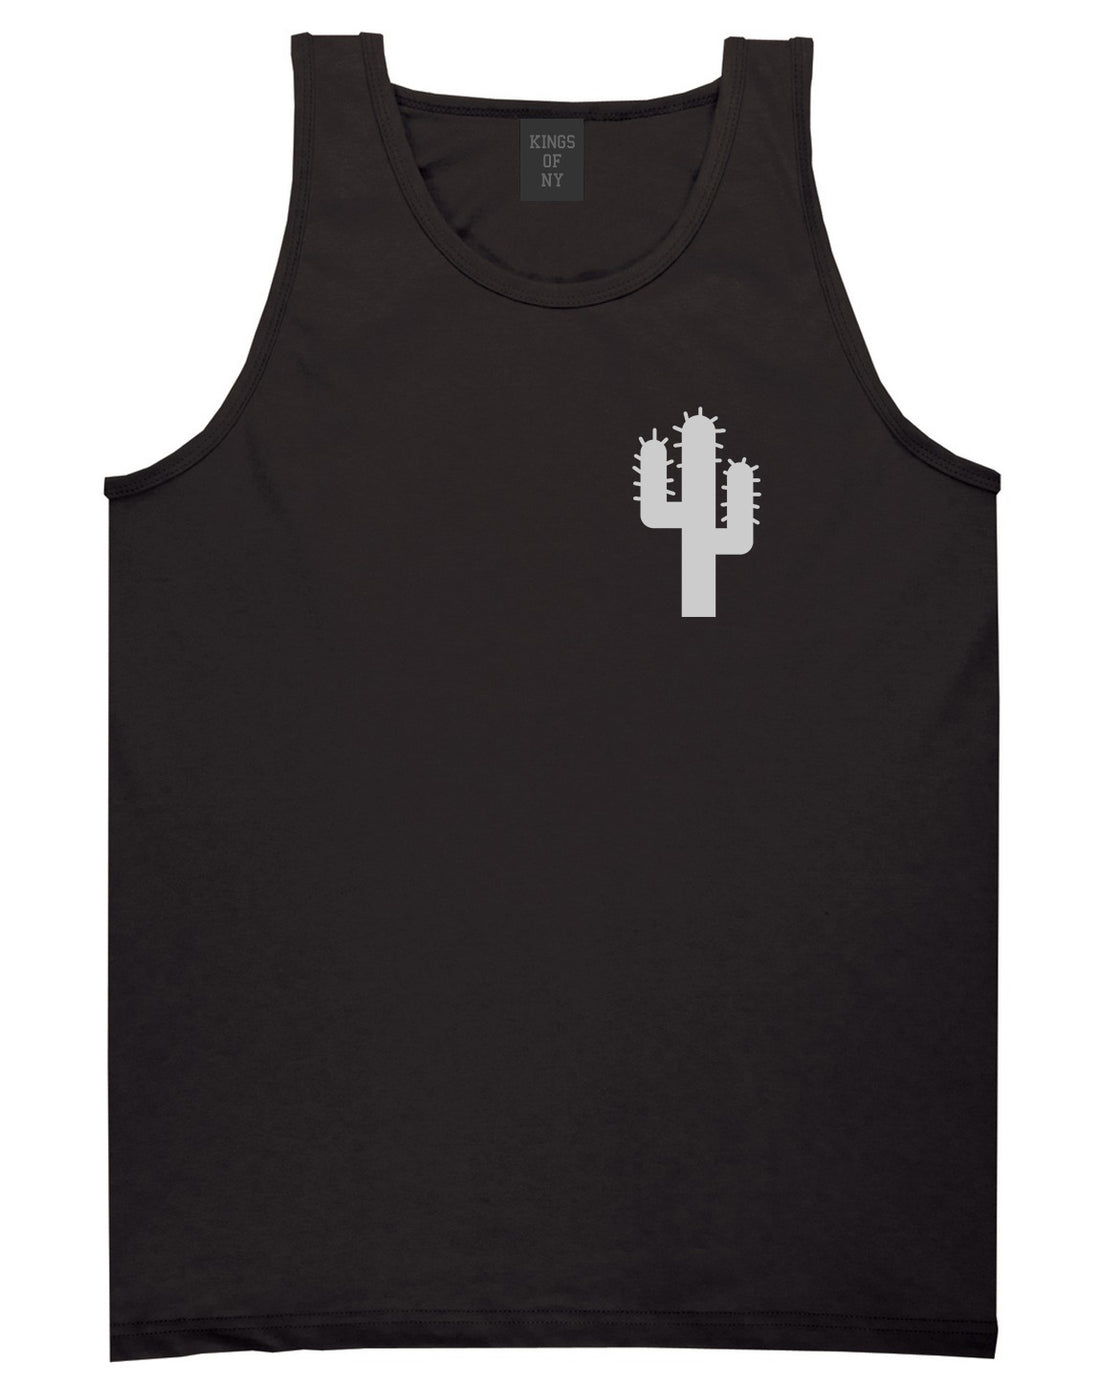 Cactus Logo Chest Black Tank Top Shirt by Kings Of NY